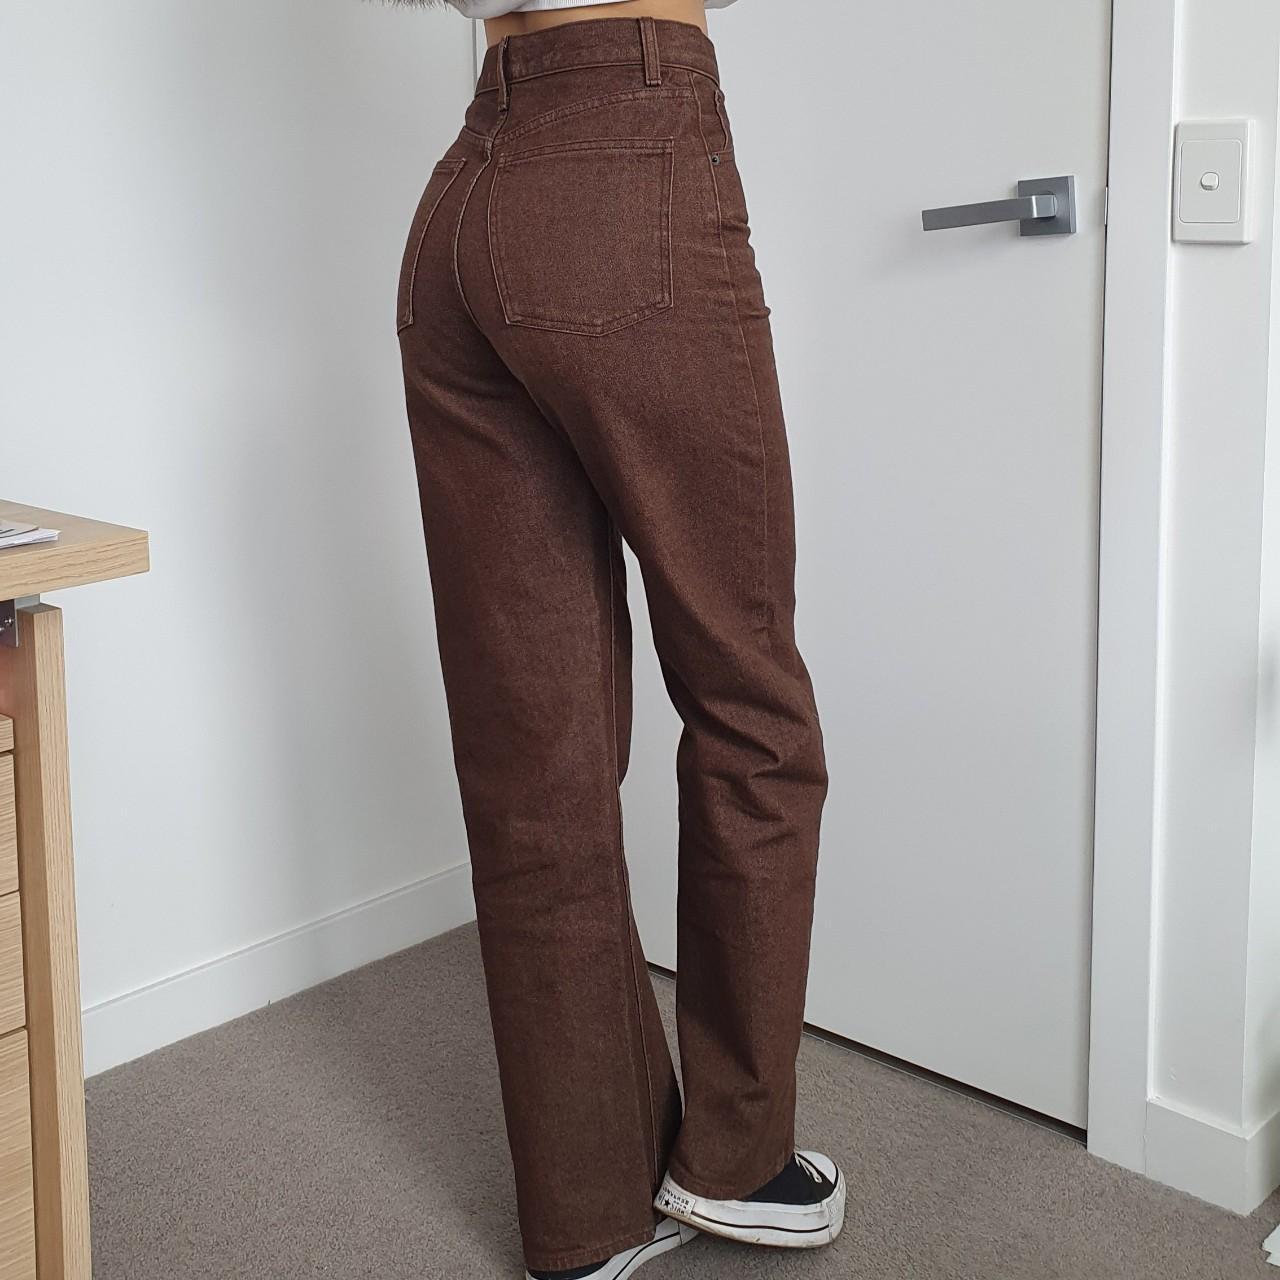 WOMEN'S UNIQLO U ROUNDED JEANS